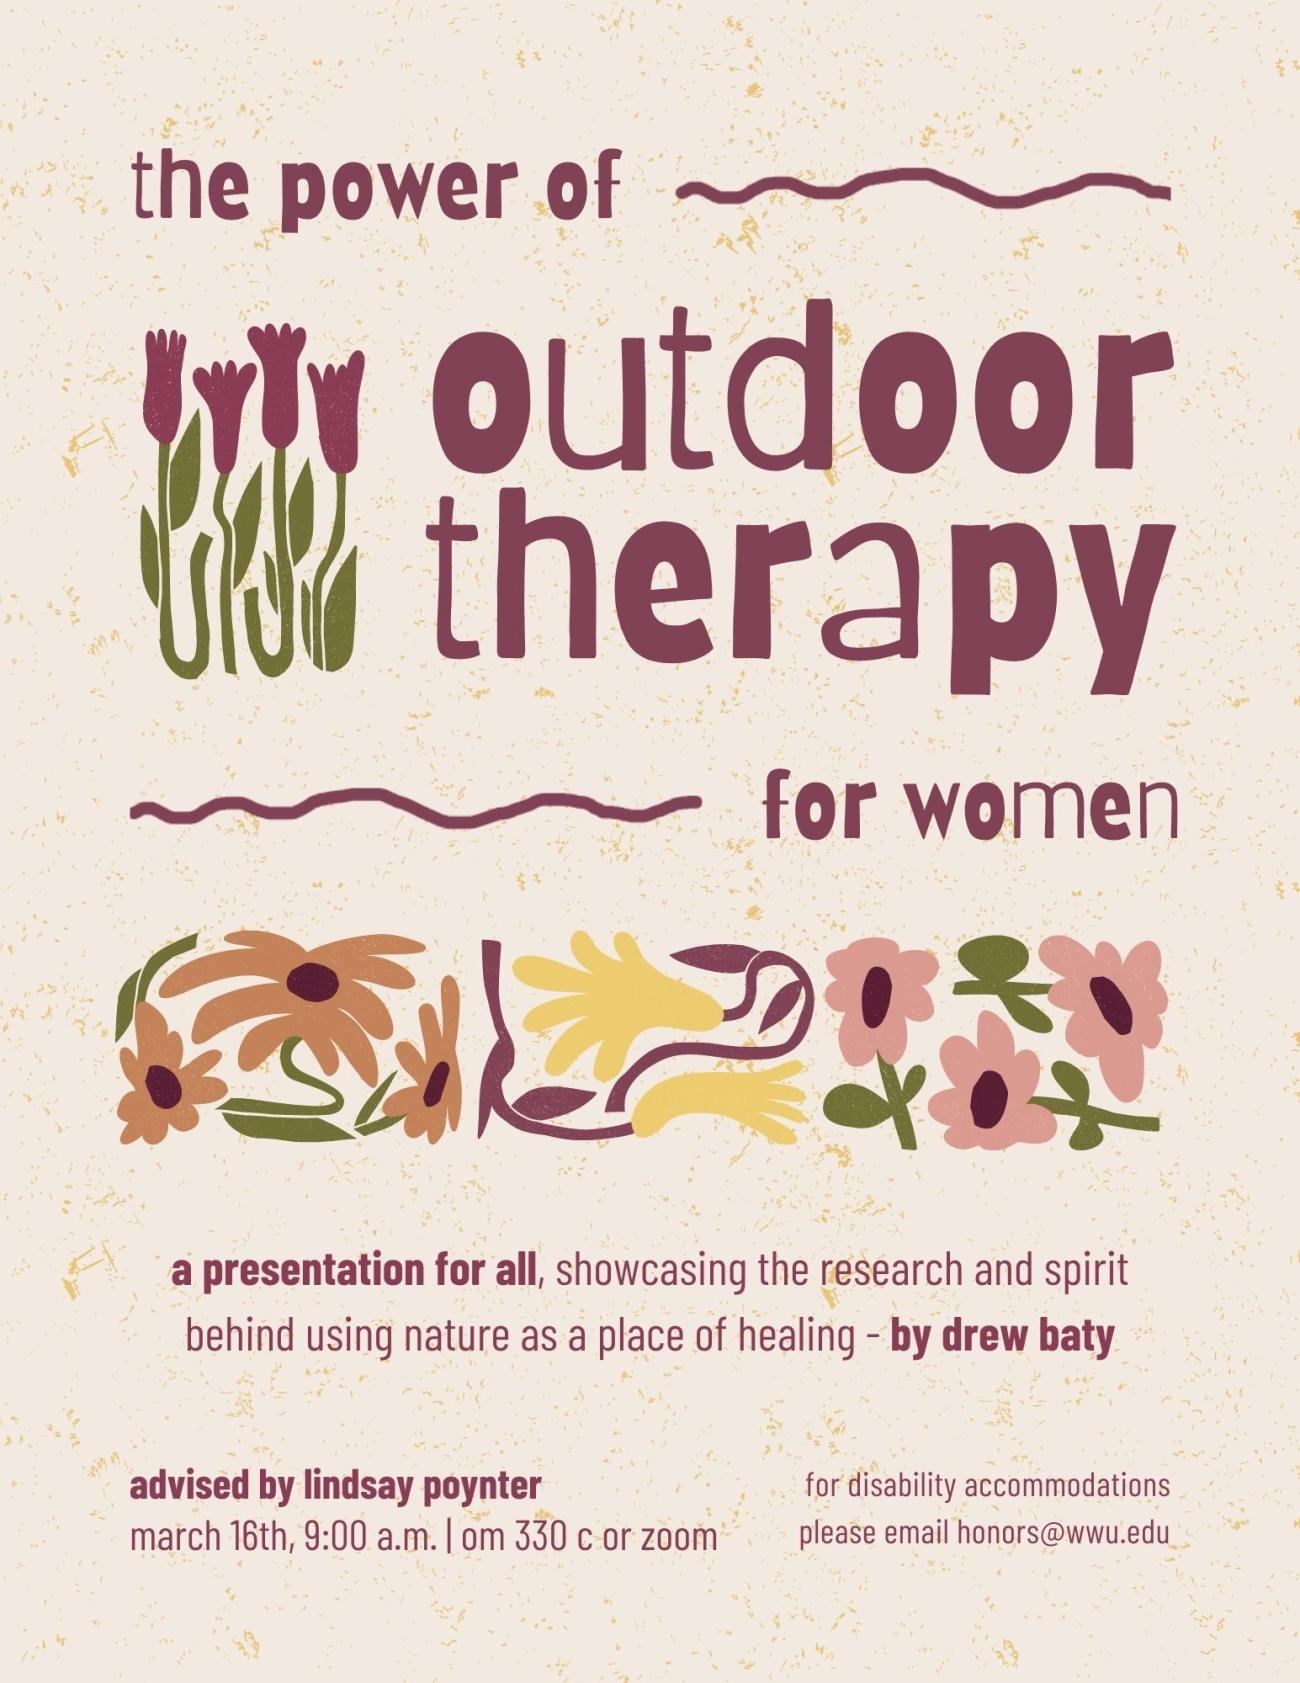 Off-white, speckled background with colorful flower illustrations. Text reads "The power of outdoor therapy for women: A presentation for all, showcasing the research and spirit behind using nature as a place of healing. By Drew Baty, Advised by Lindsay Poynter. March 16th, 9:00 a.m., OM 330C or Zoom, for disability accomodations please email honors@wwu.edu".